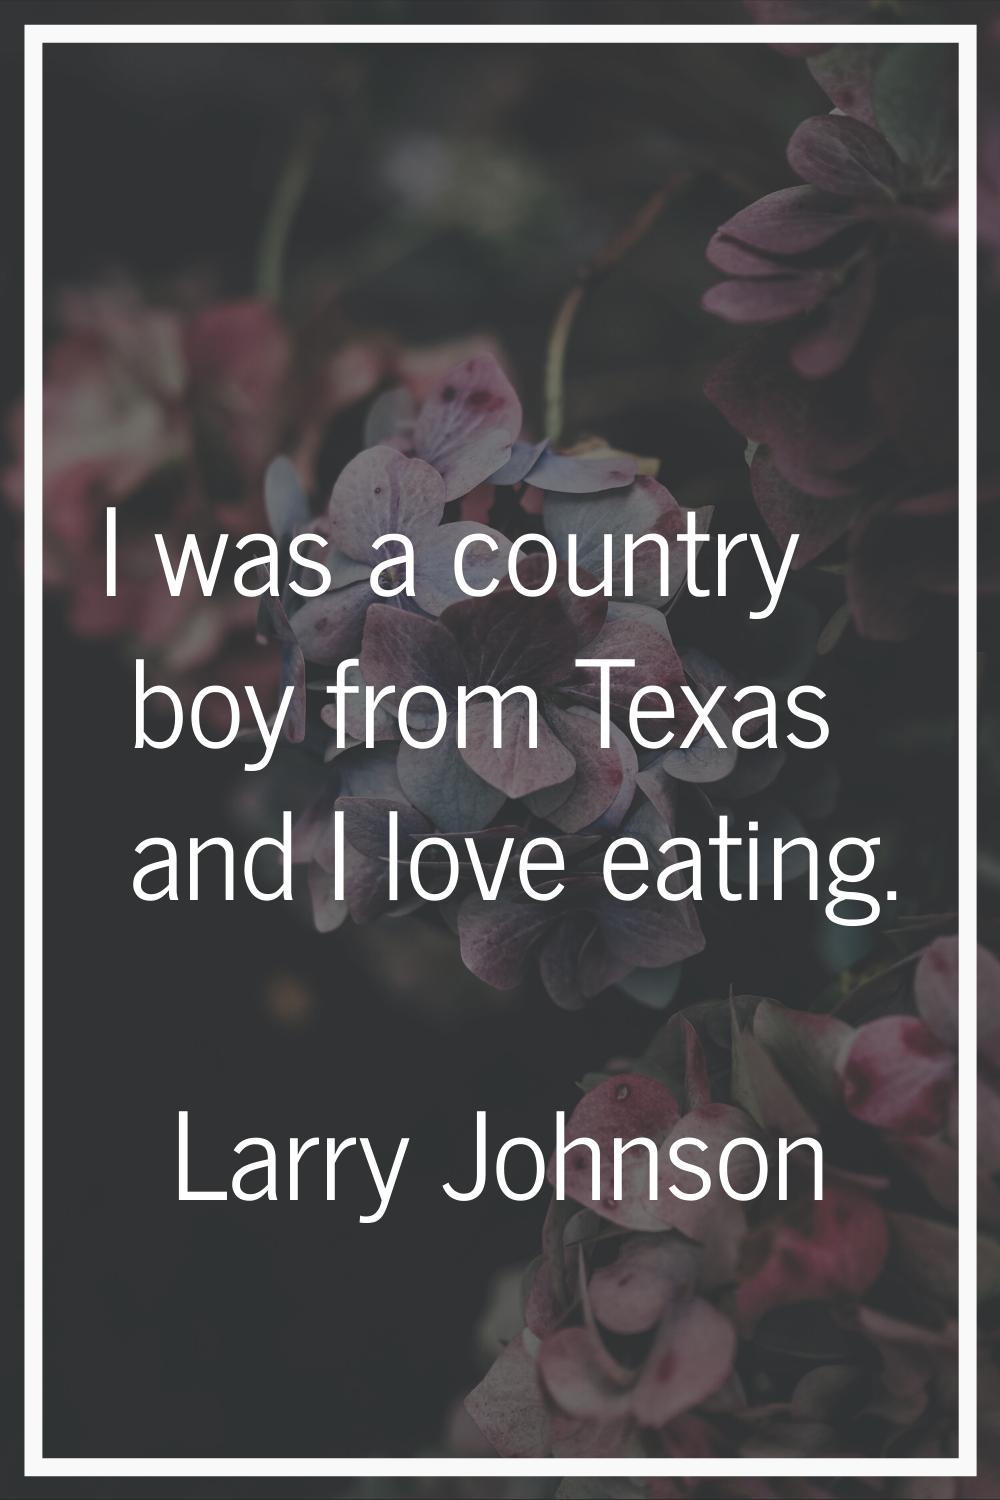 I was a country boy from Texas and I love eating.